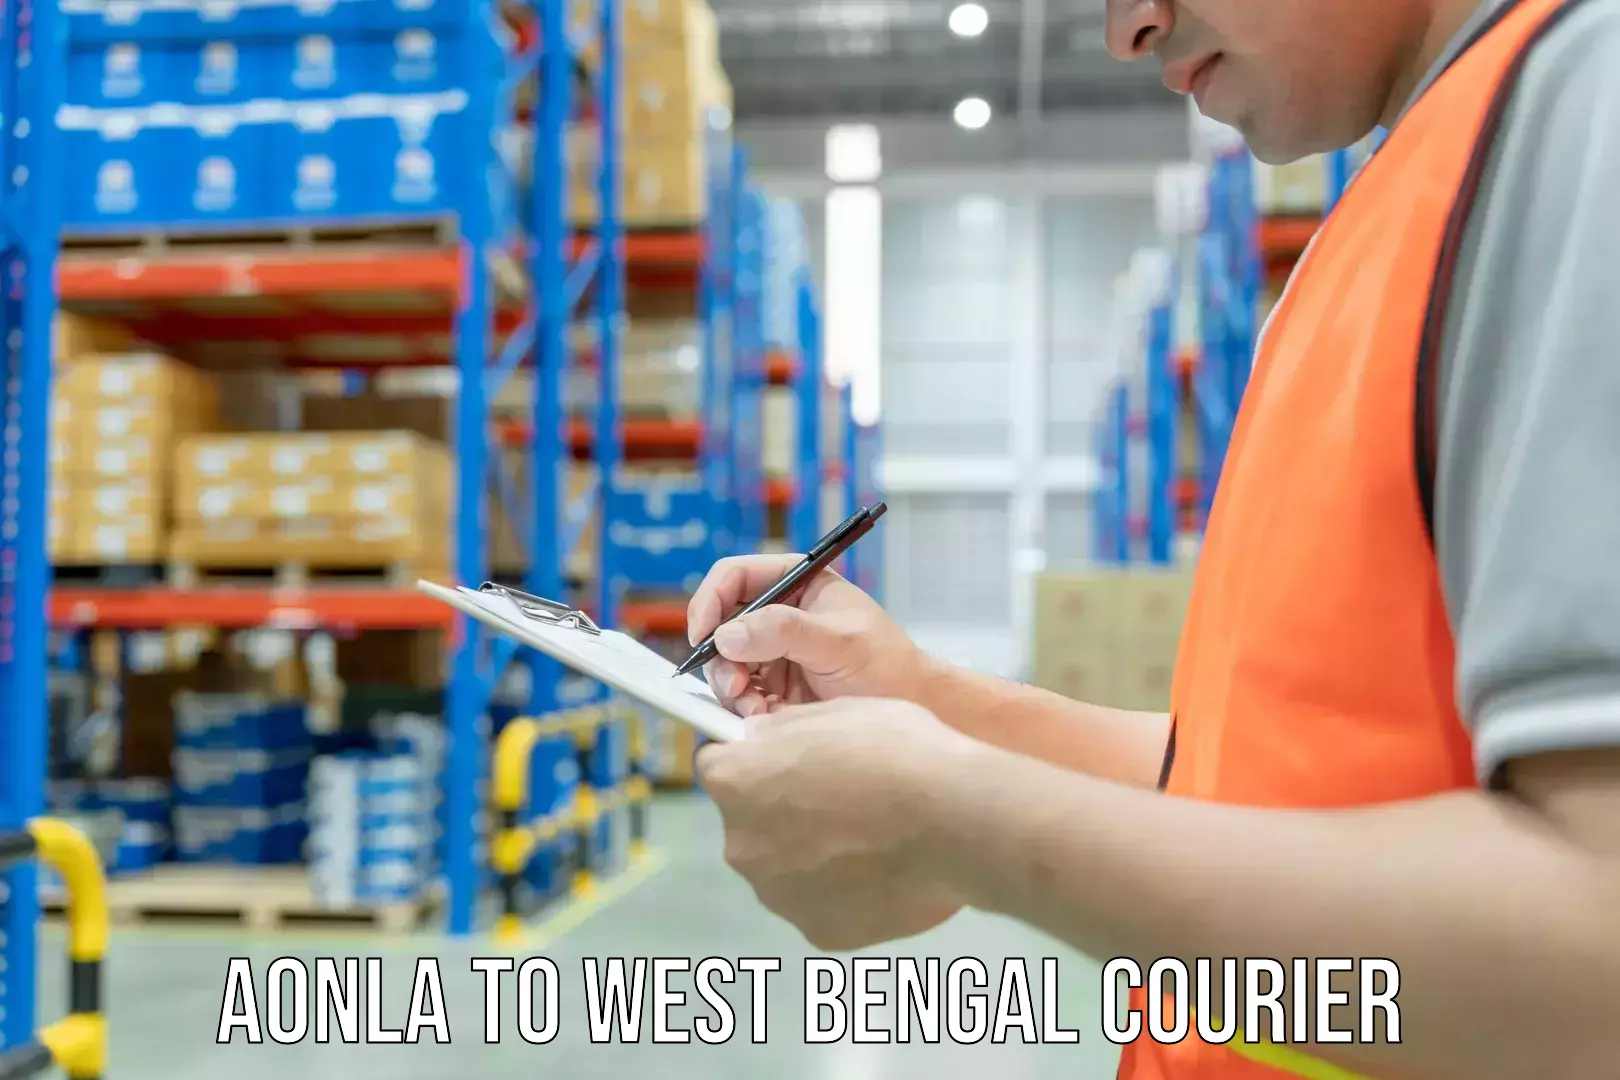 Pharmaceutical courier Aonla to West Bengal